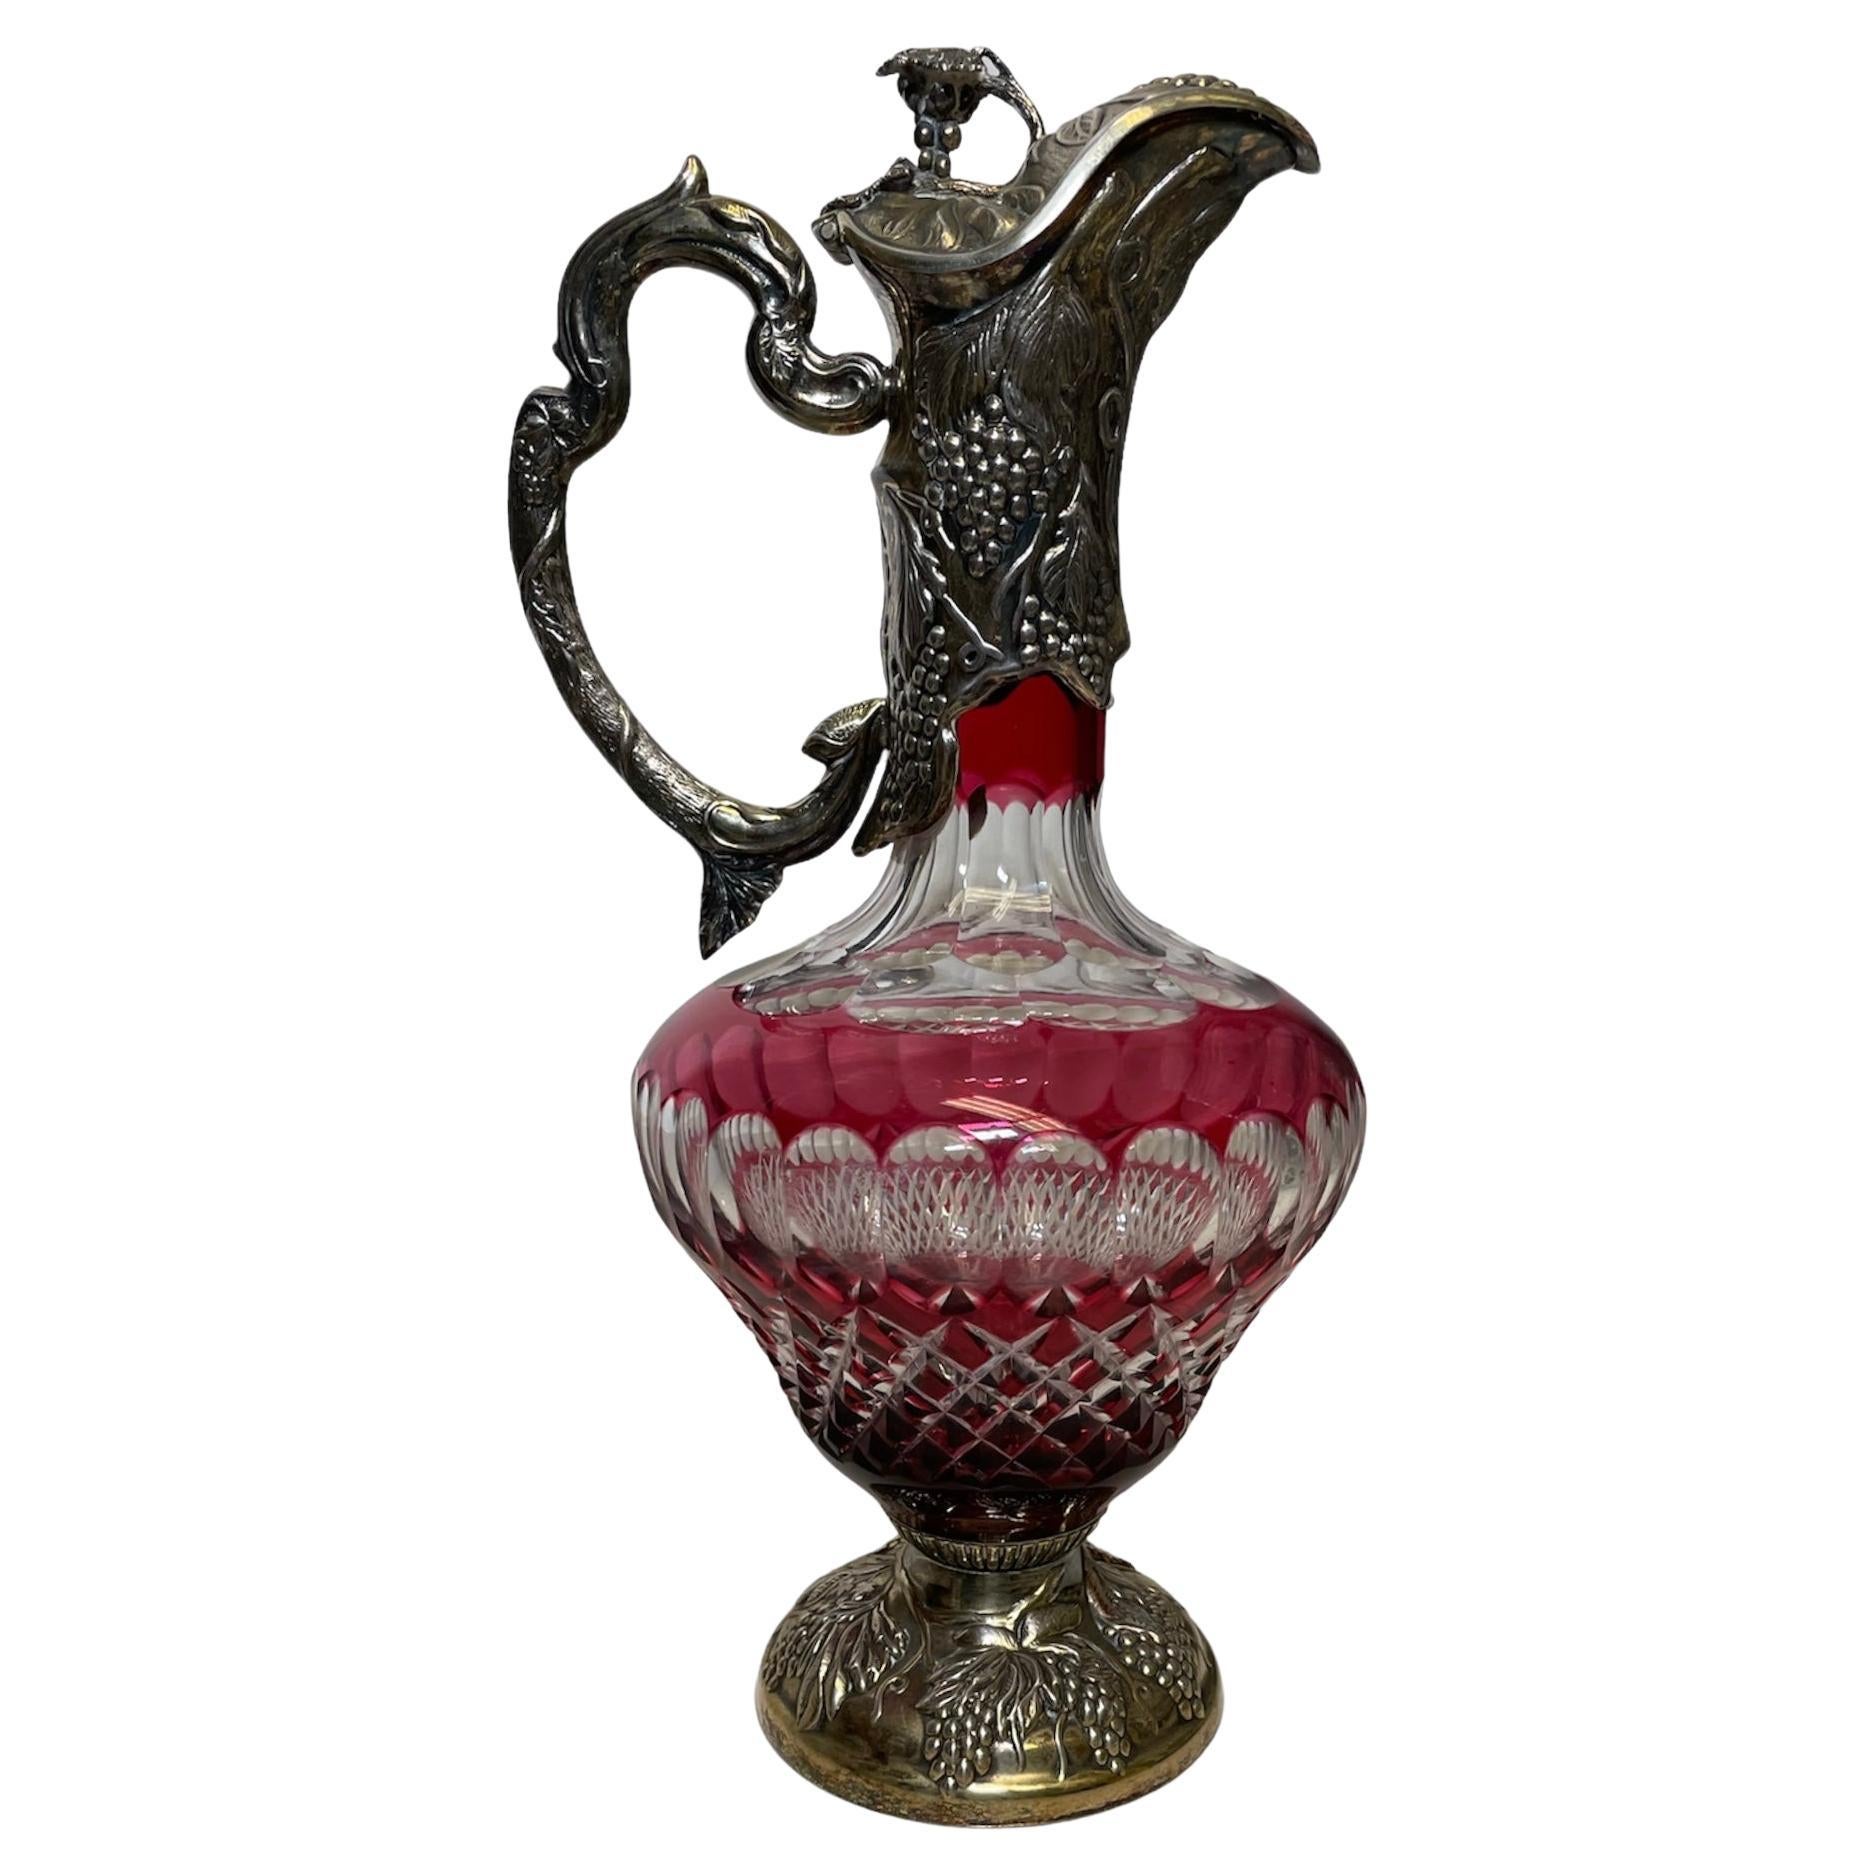 https://a.1stdibscdn.com/english-electroplated-silver-and-cut-crystal-claret-wine-jug-and-or-decanter-for-sale/f_54312/f_362670221695316640120/f_36267022_1695316640657_bg_processed.jpg